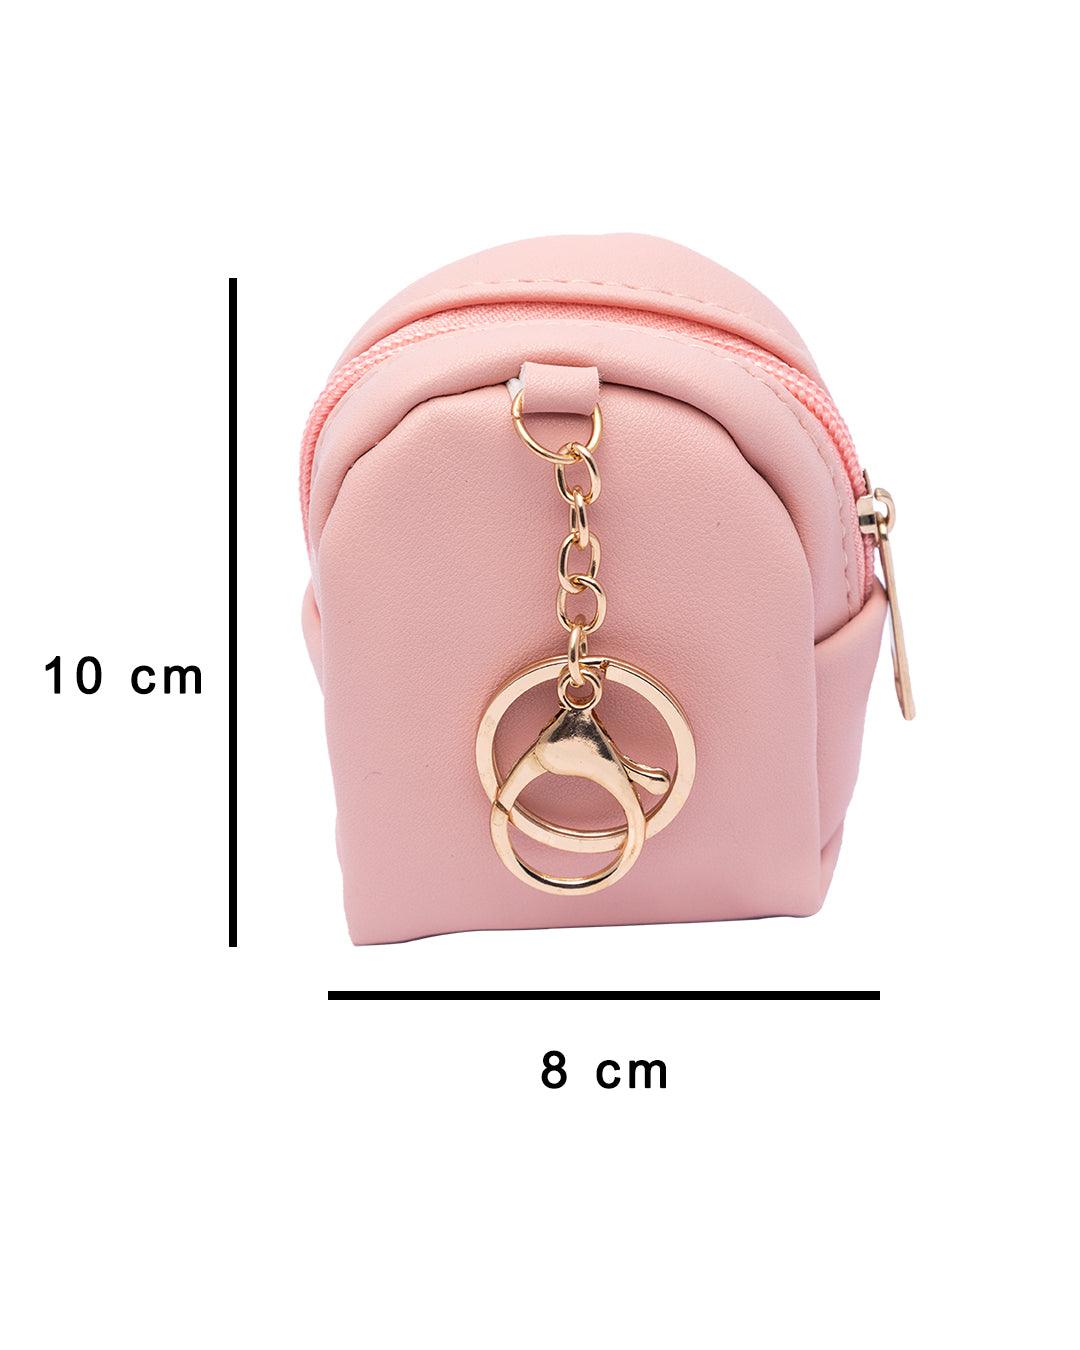 ELECTROPRIME New Women Mini Backpack Shape Coin Bag Wallet Hand Pouch Purse  Key Holder(w N4A9 : Amazon.in: Bags, Wallets and Luggage